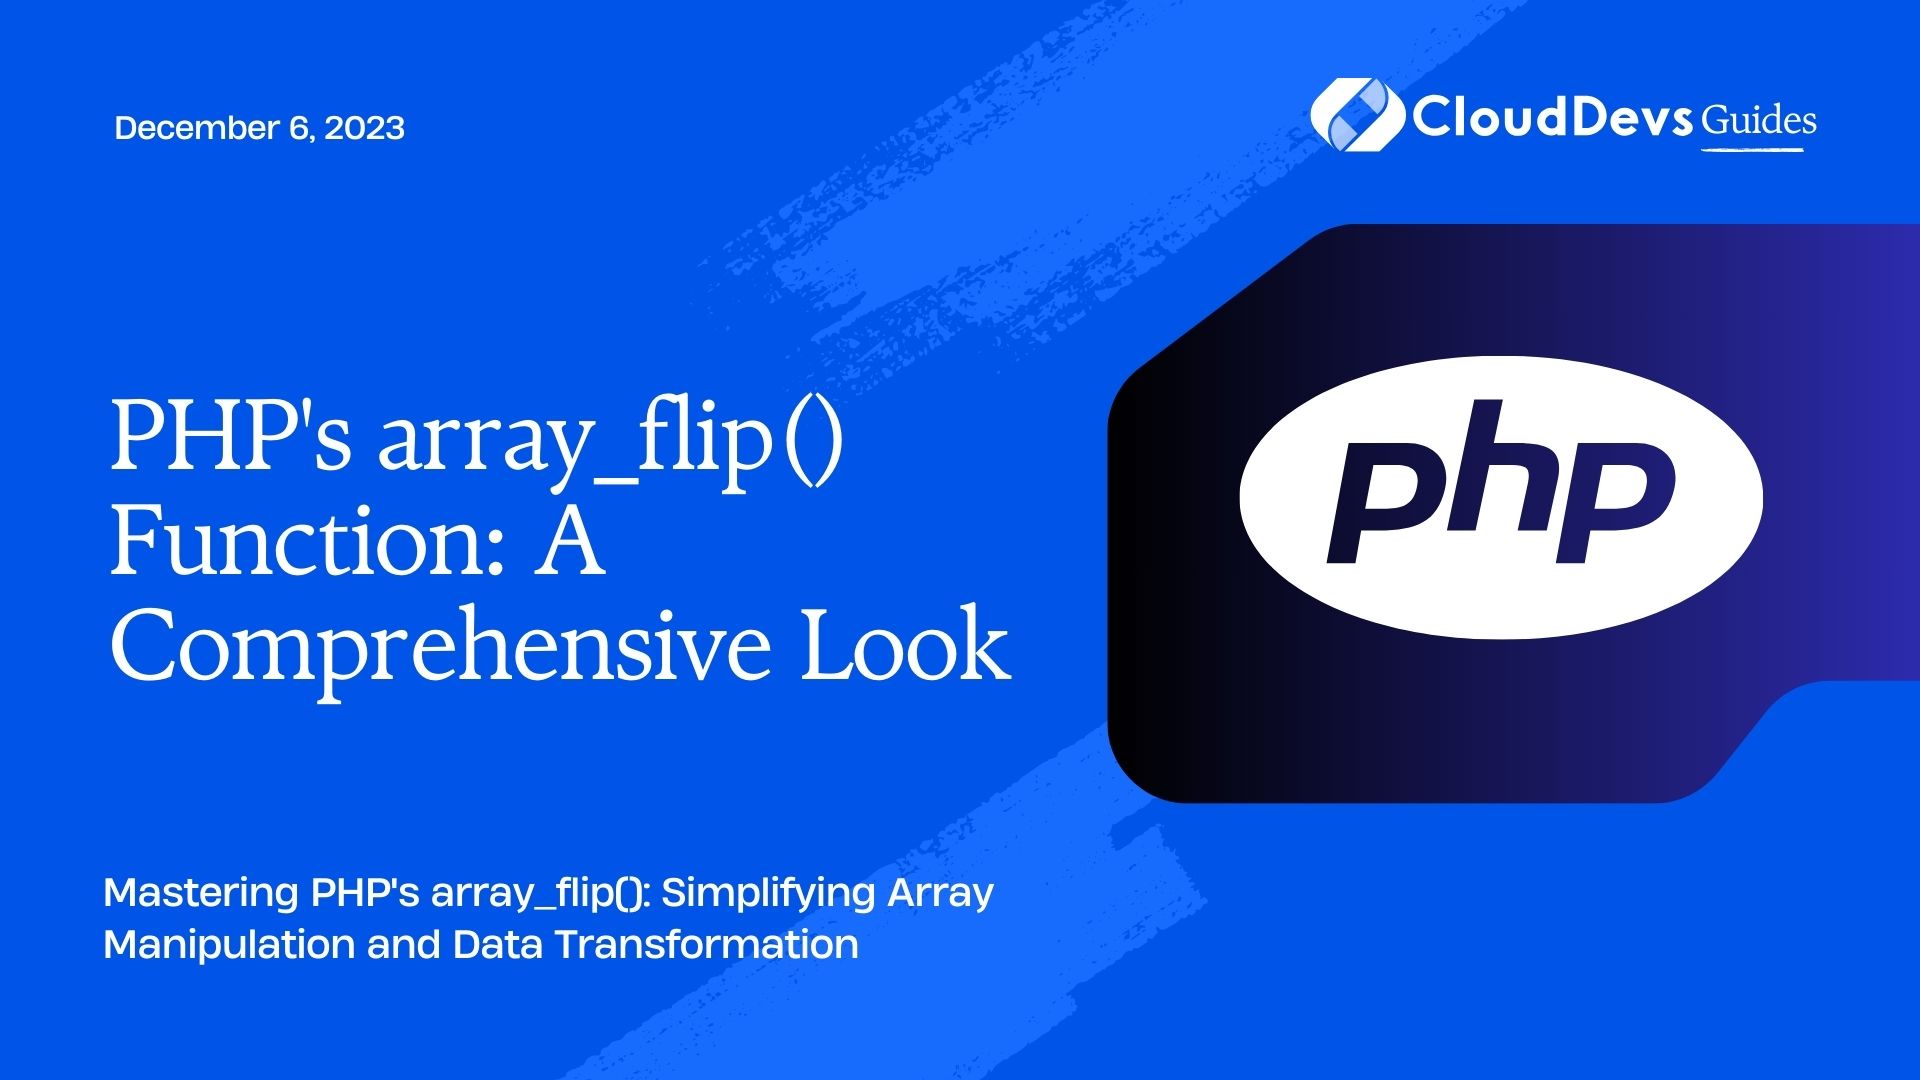 PHP's array_flip() Function: A Comprehensive Look